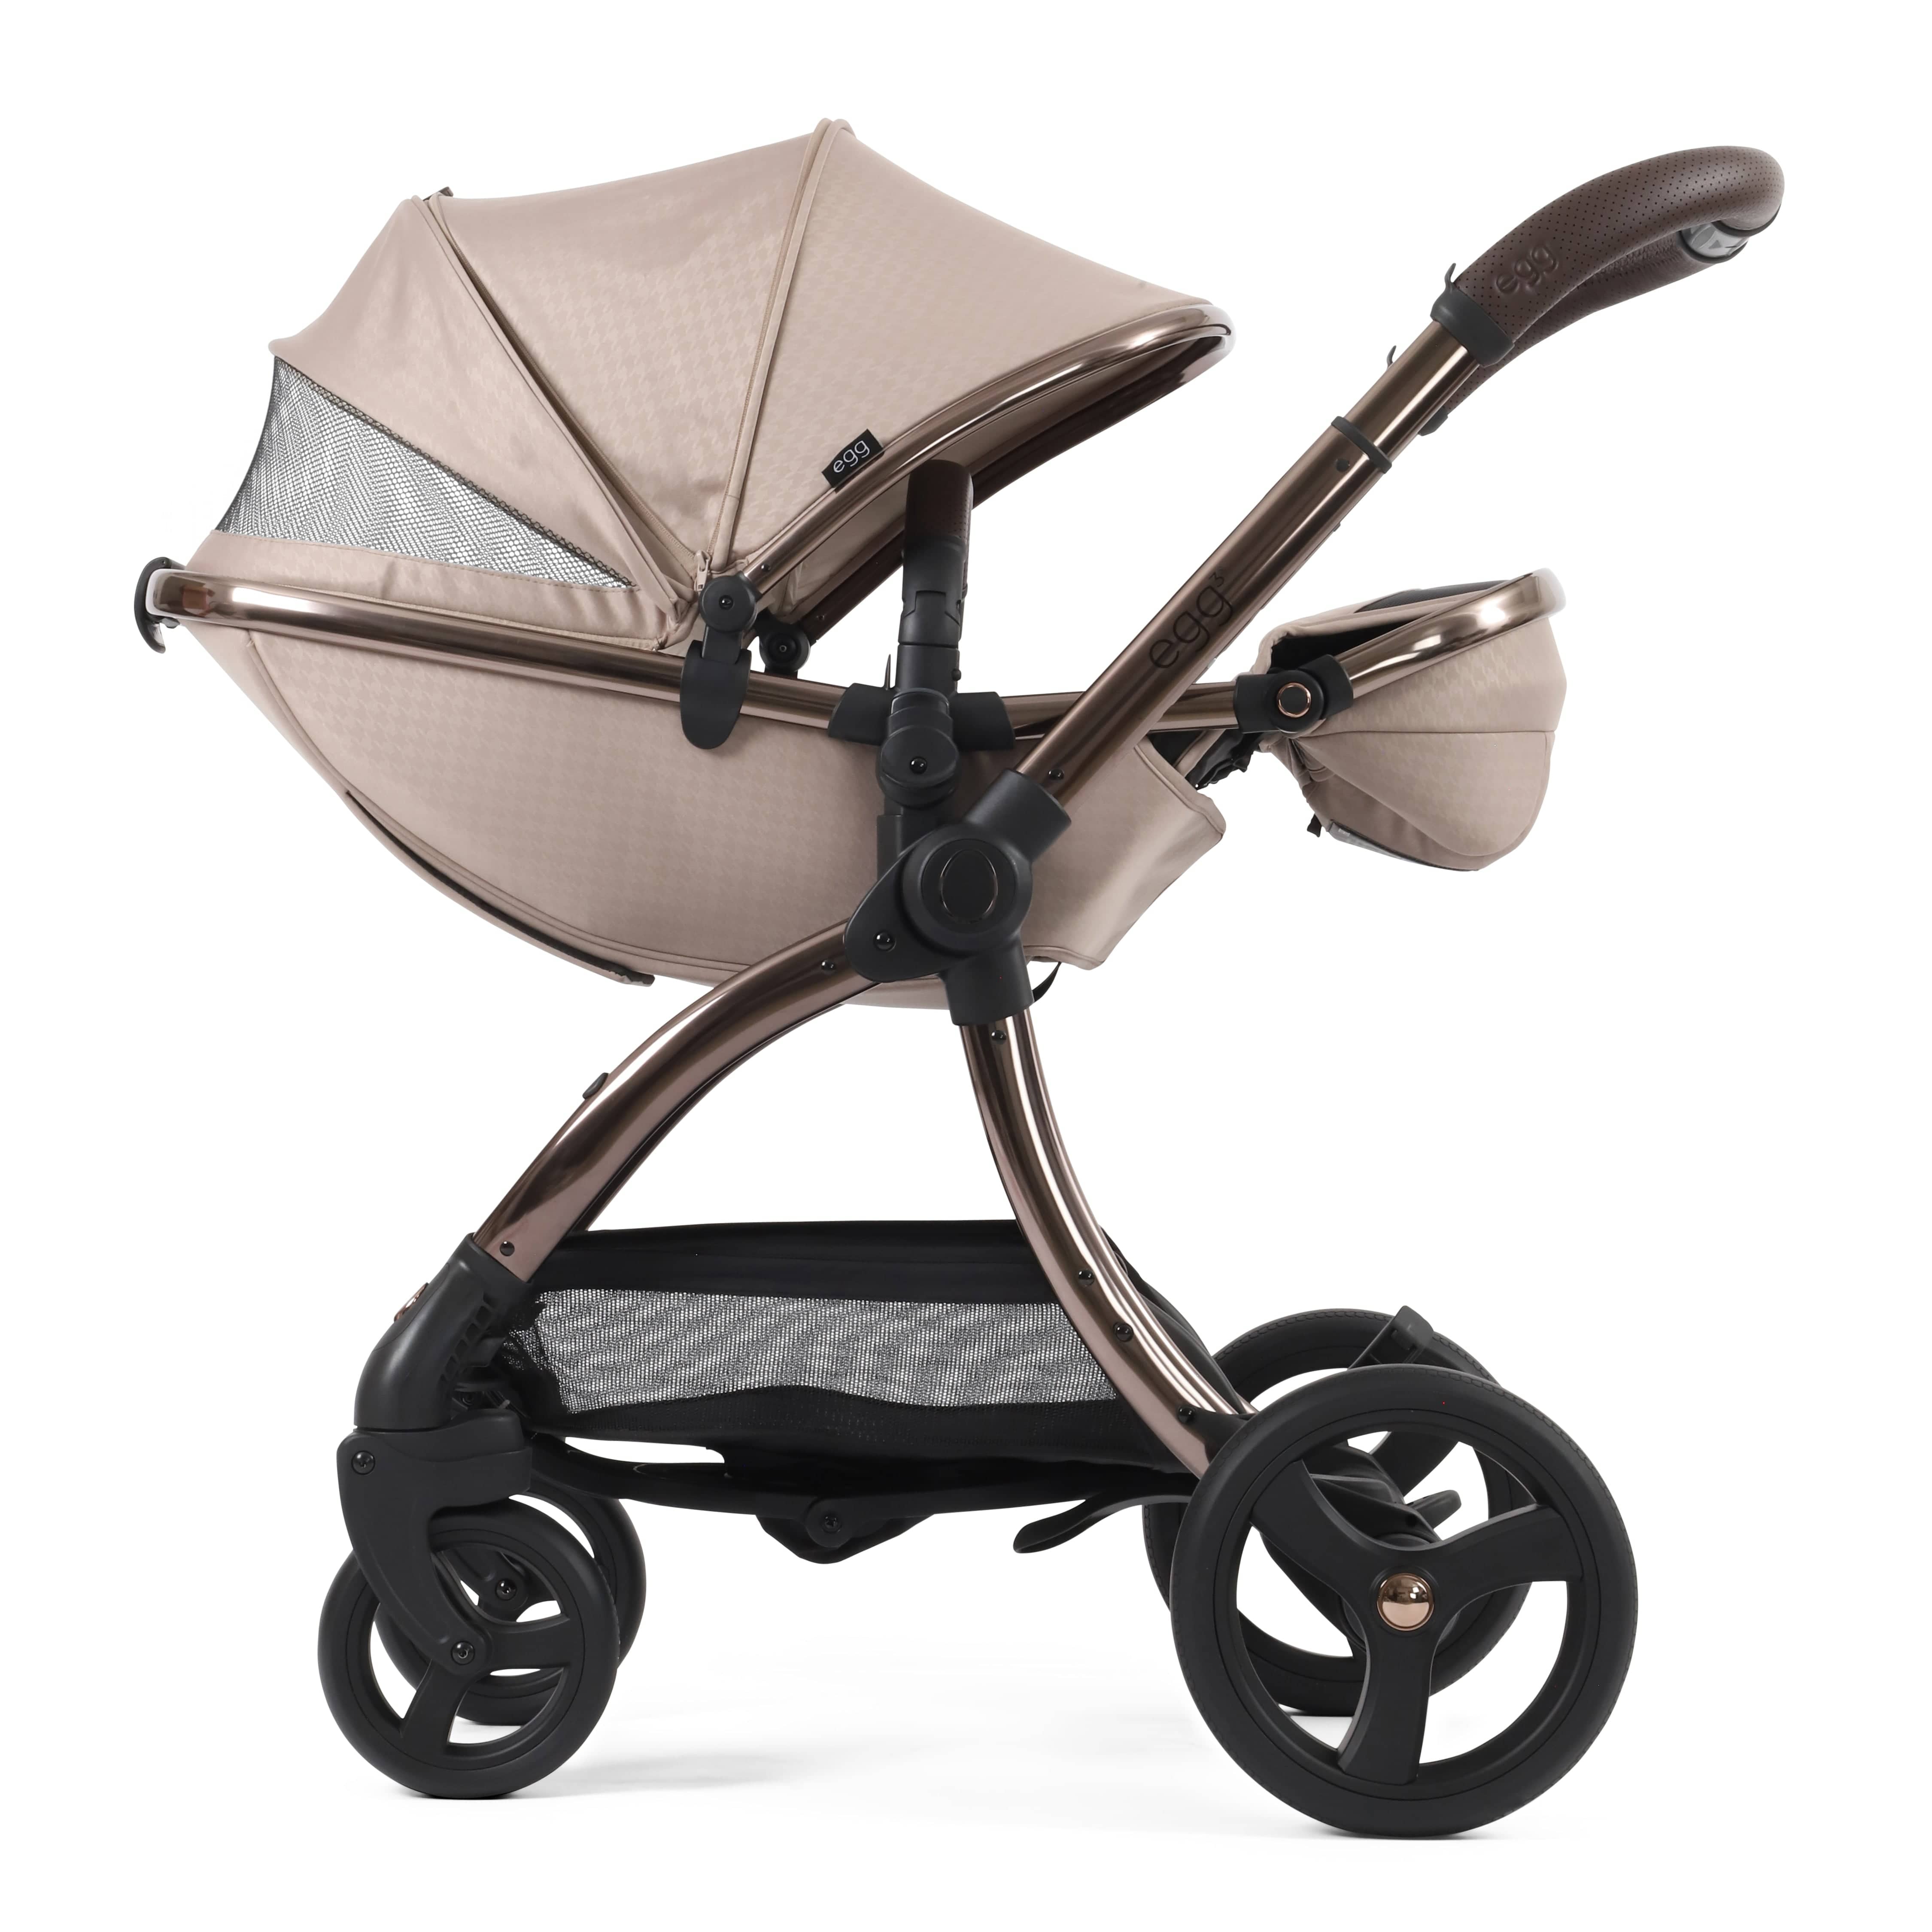 egg baby prams egg3 Luxury Travel System Bundle Houndstooth Almond Special Edition